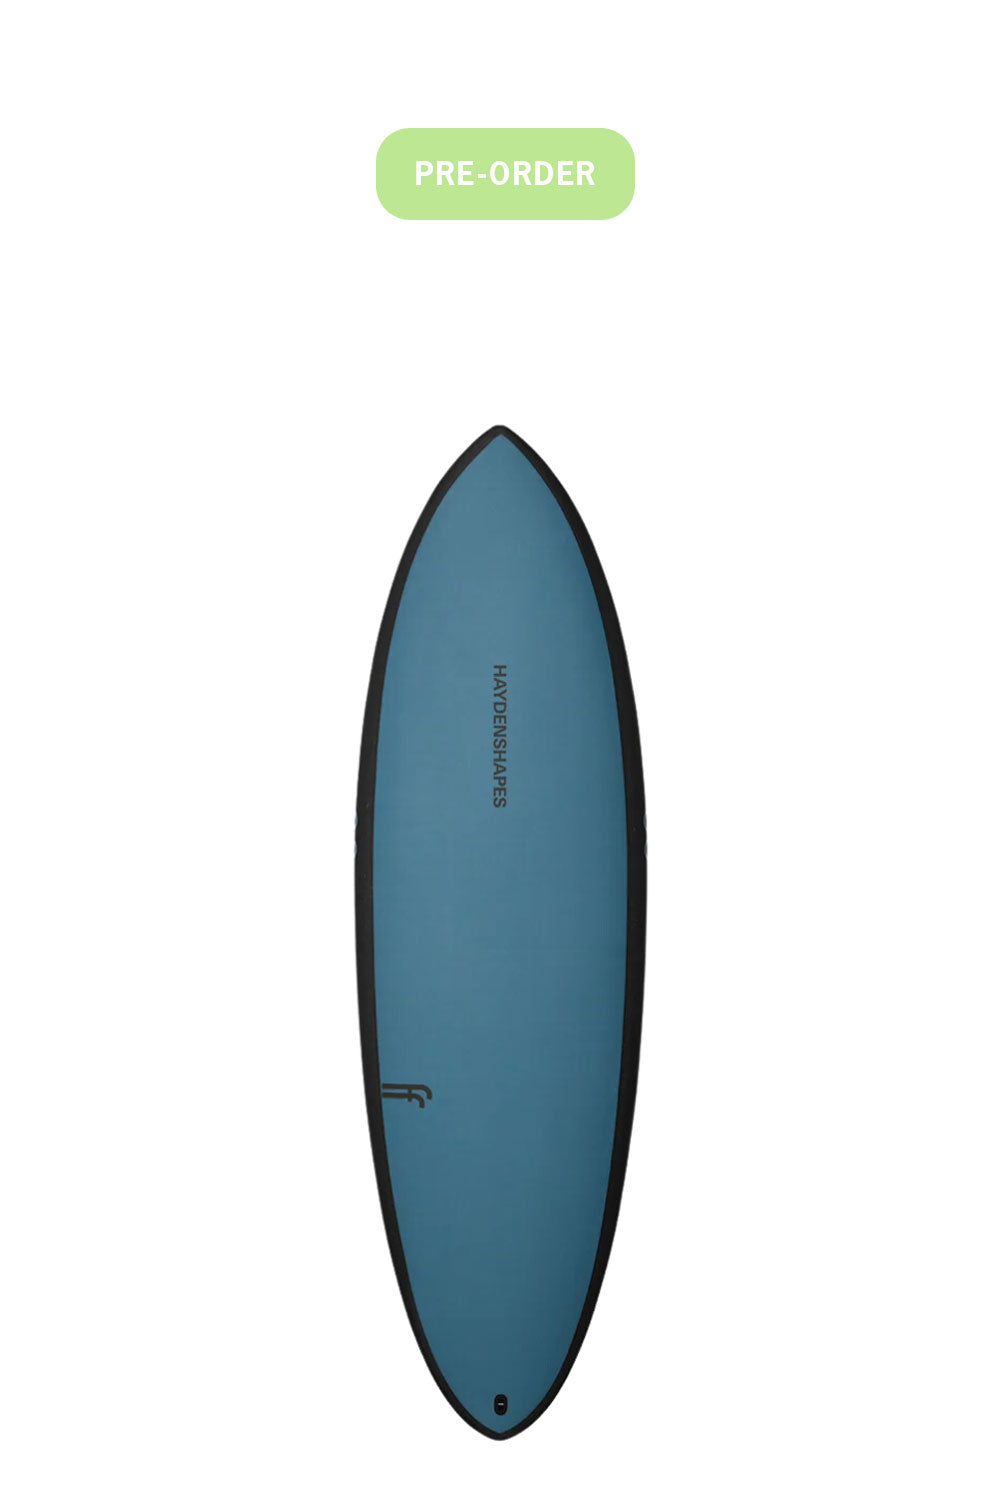 HAYDENSHAPES SURFBOARDS | Available online at PUKAS SURF SHOP